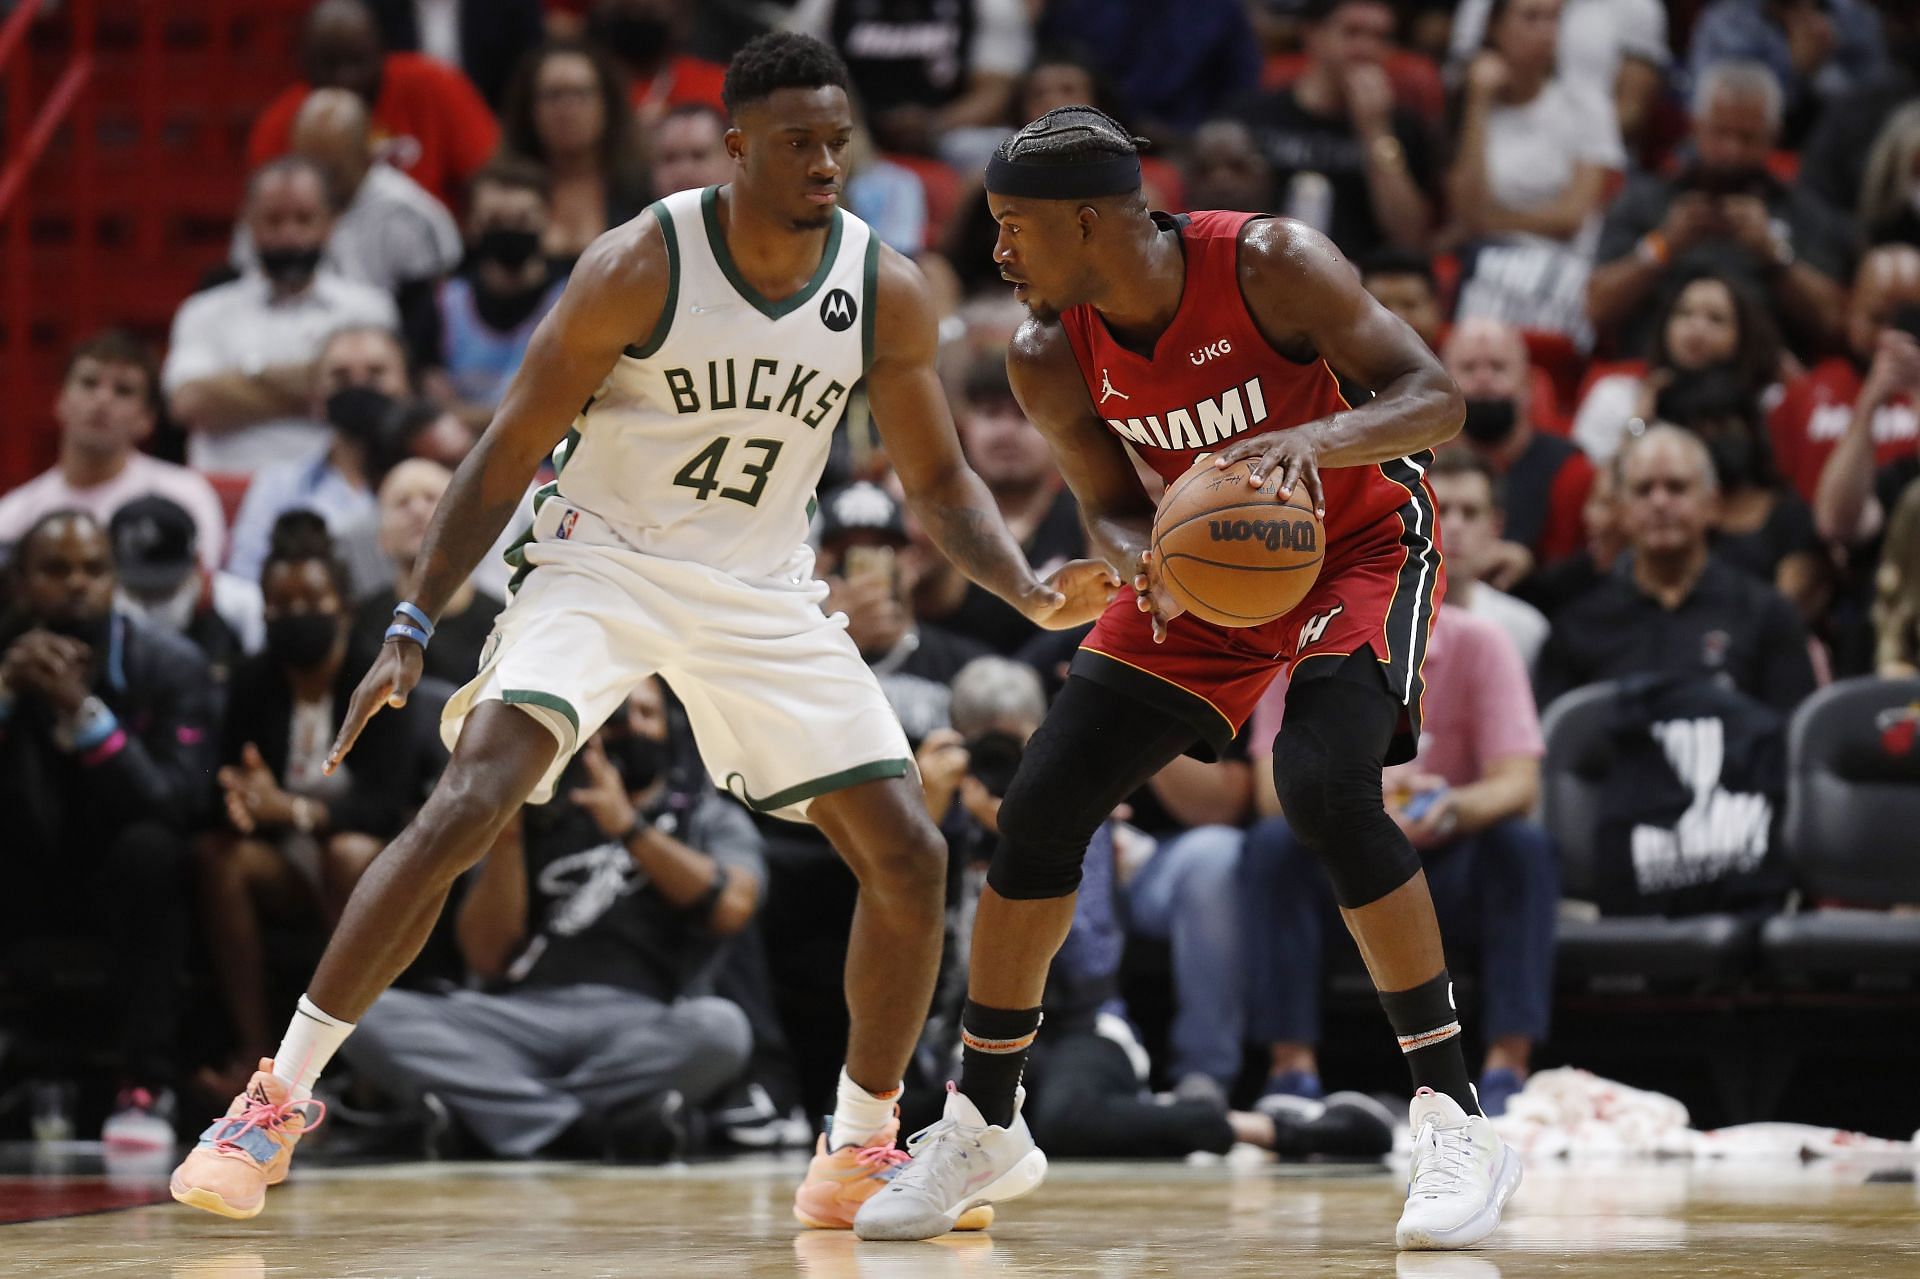 The Milwaukee Bucks will face the Miami Heat at the FTX Arena on Wednesday